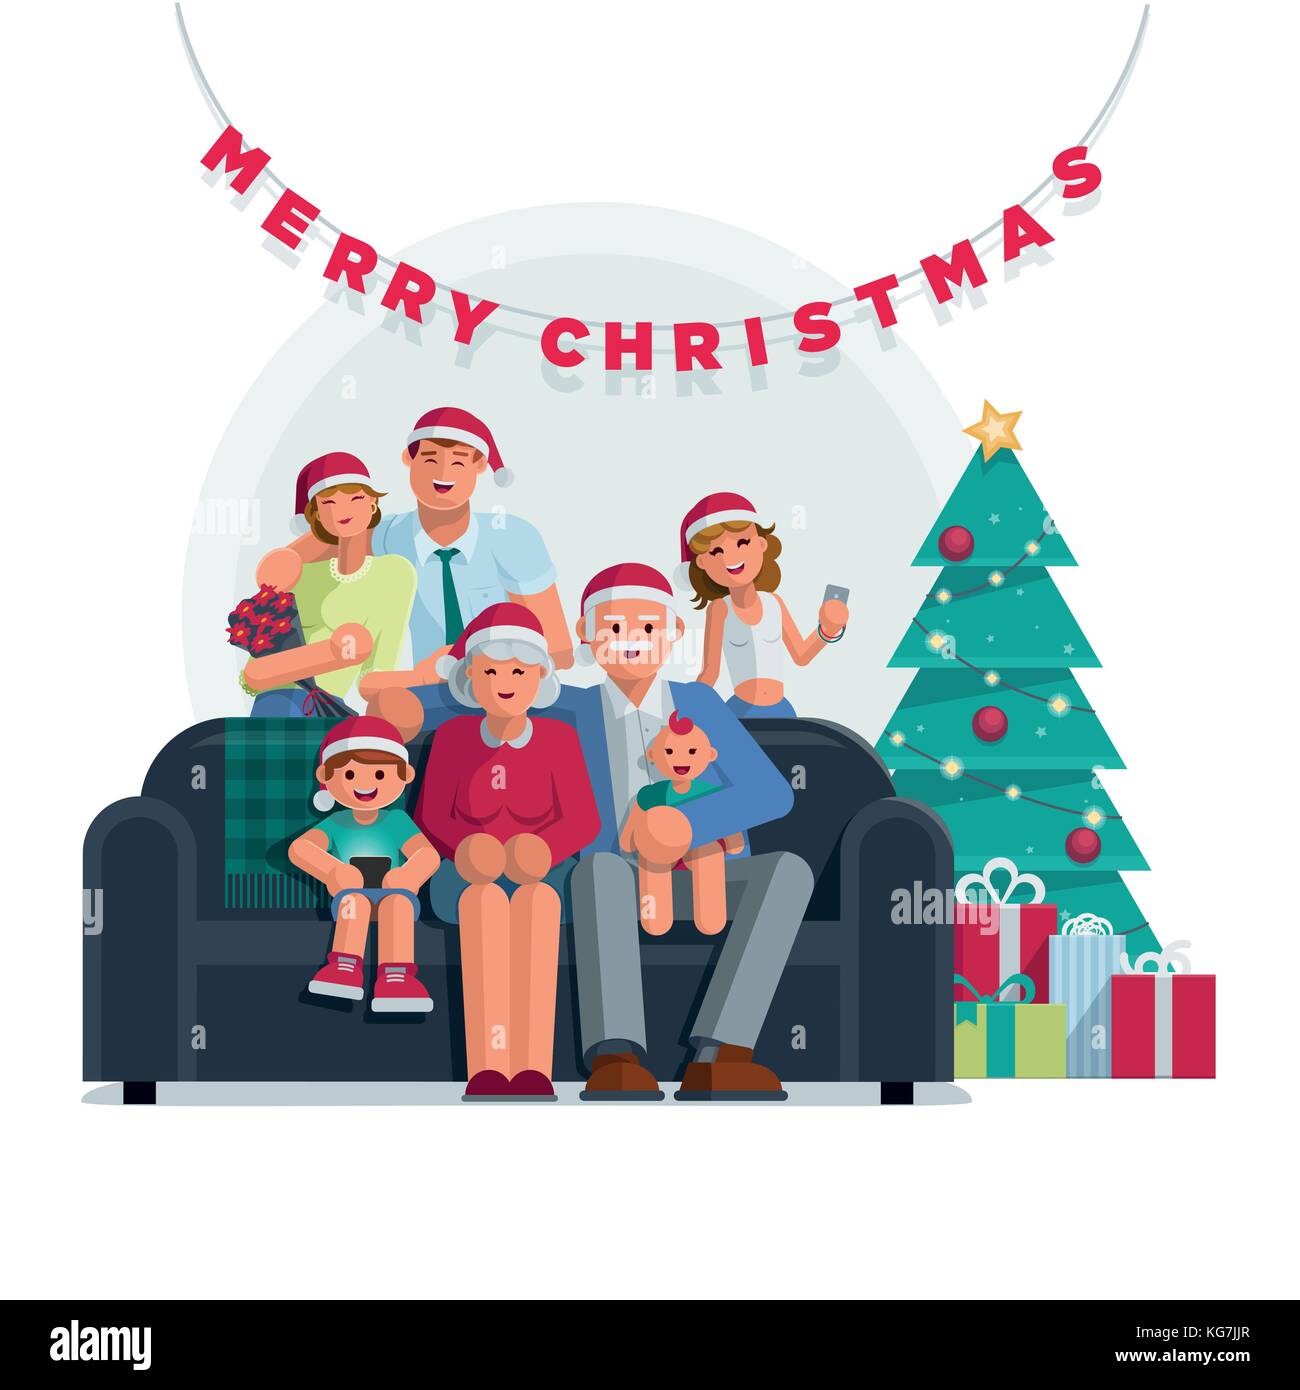 The whole family is together at Christmas. Grandmother, grandfather, mother, father son and daughter together. Elements are layered separately. Isolat Stock Vector